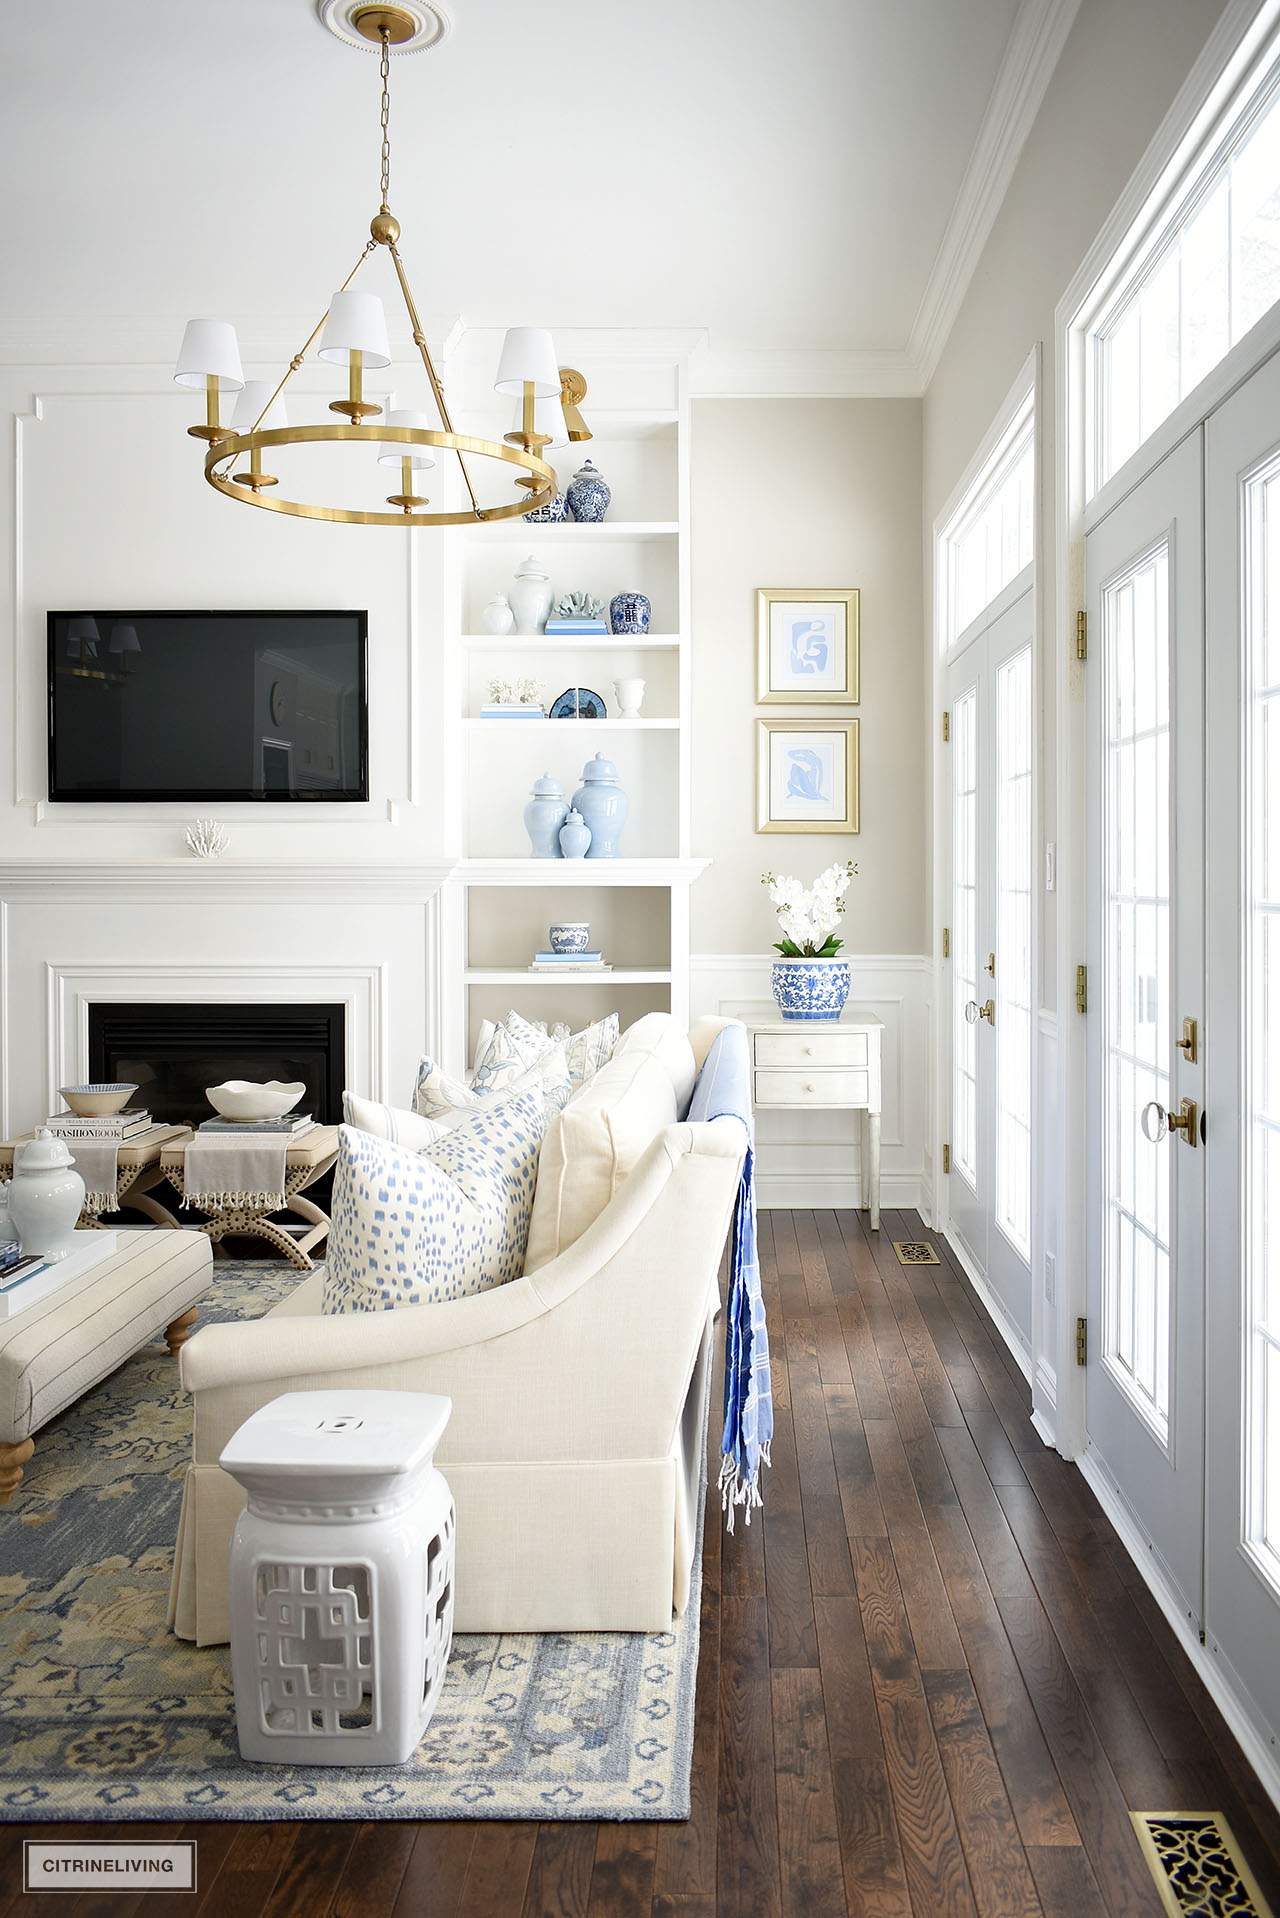 Living room decor in neutrals with touches of blue and white